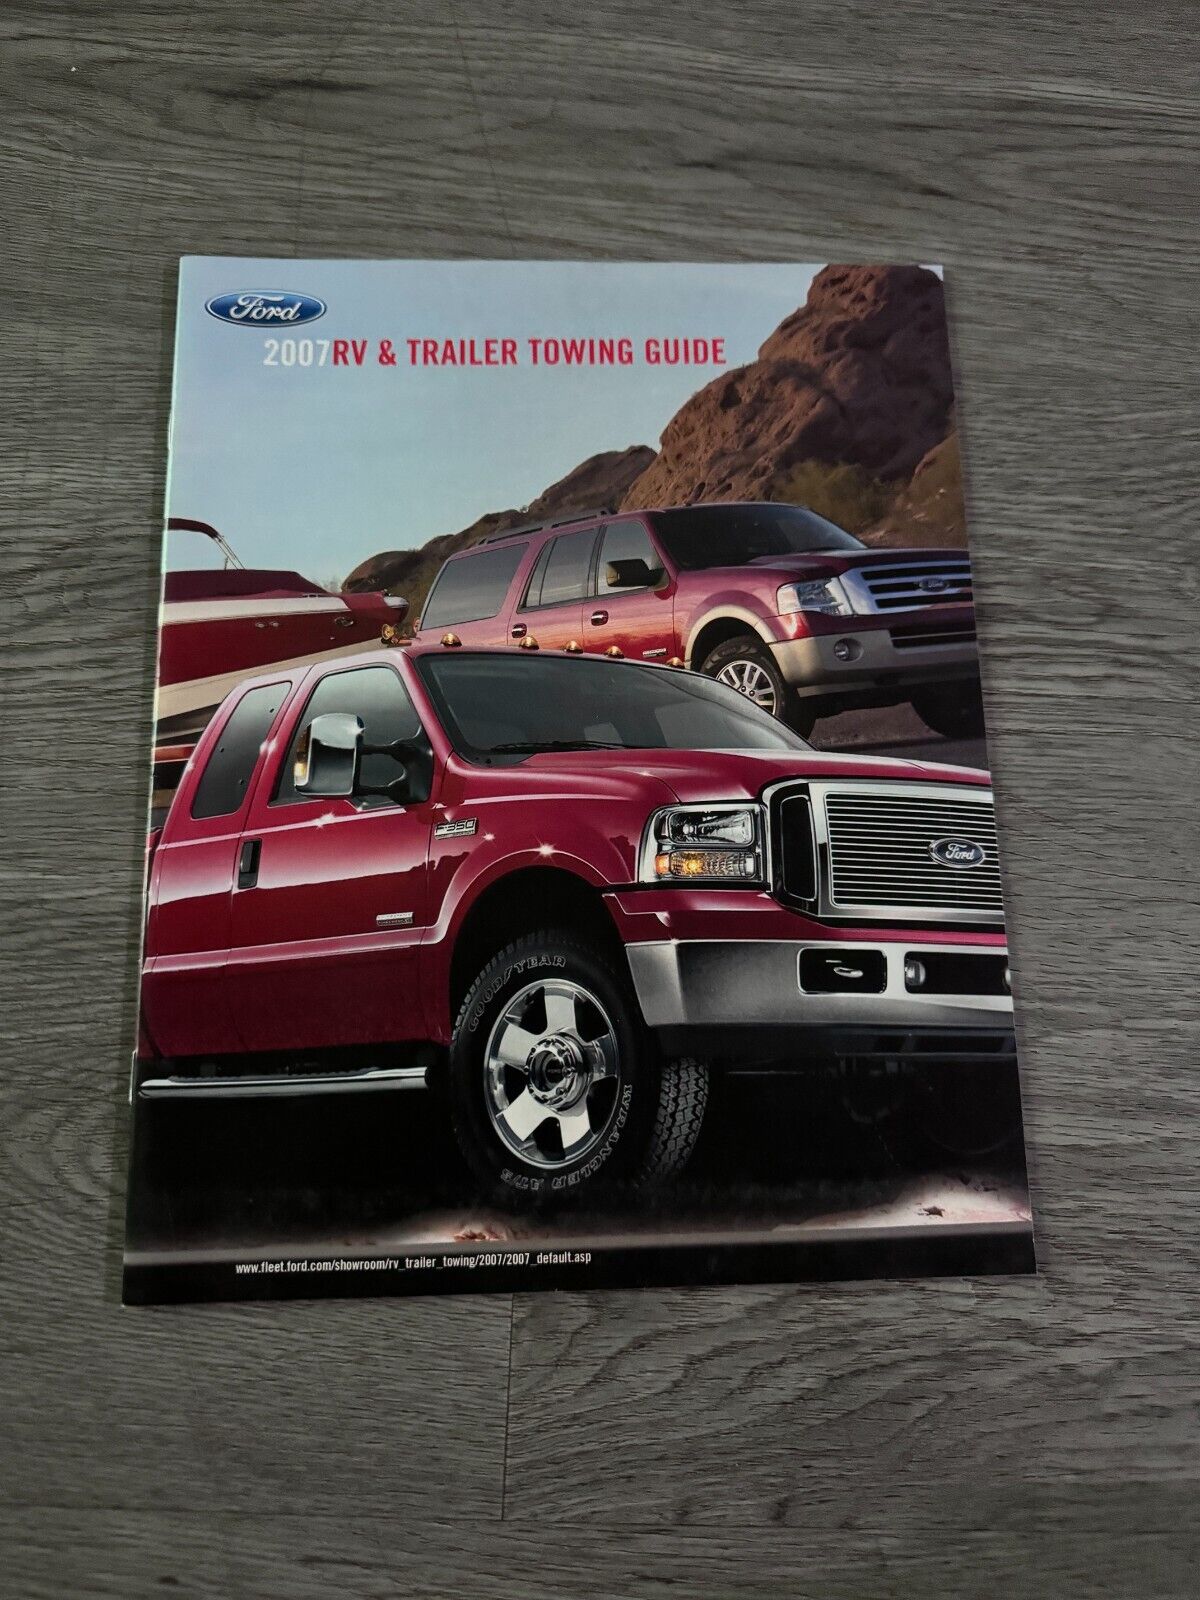 2007 Ford RV & Trailer Towing Guide Automotive Dealer Brochure